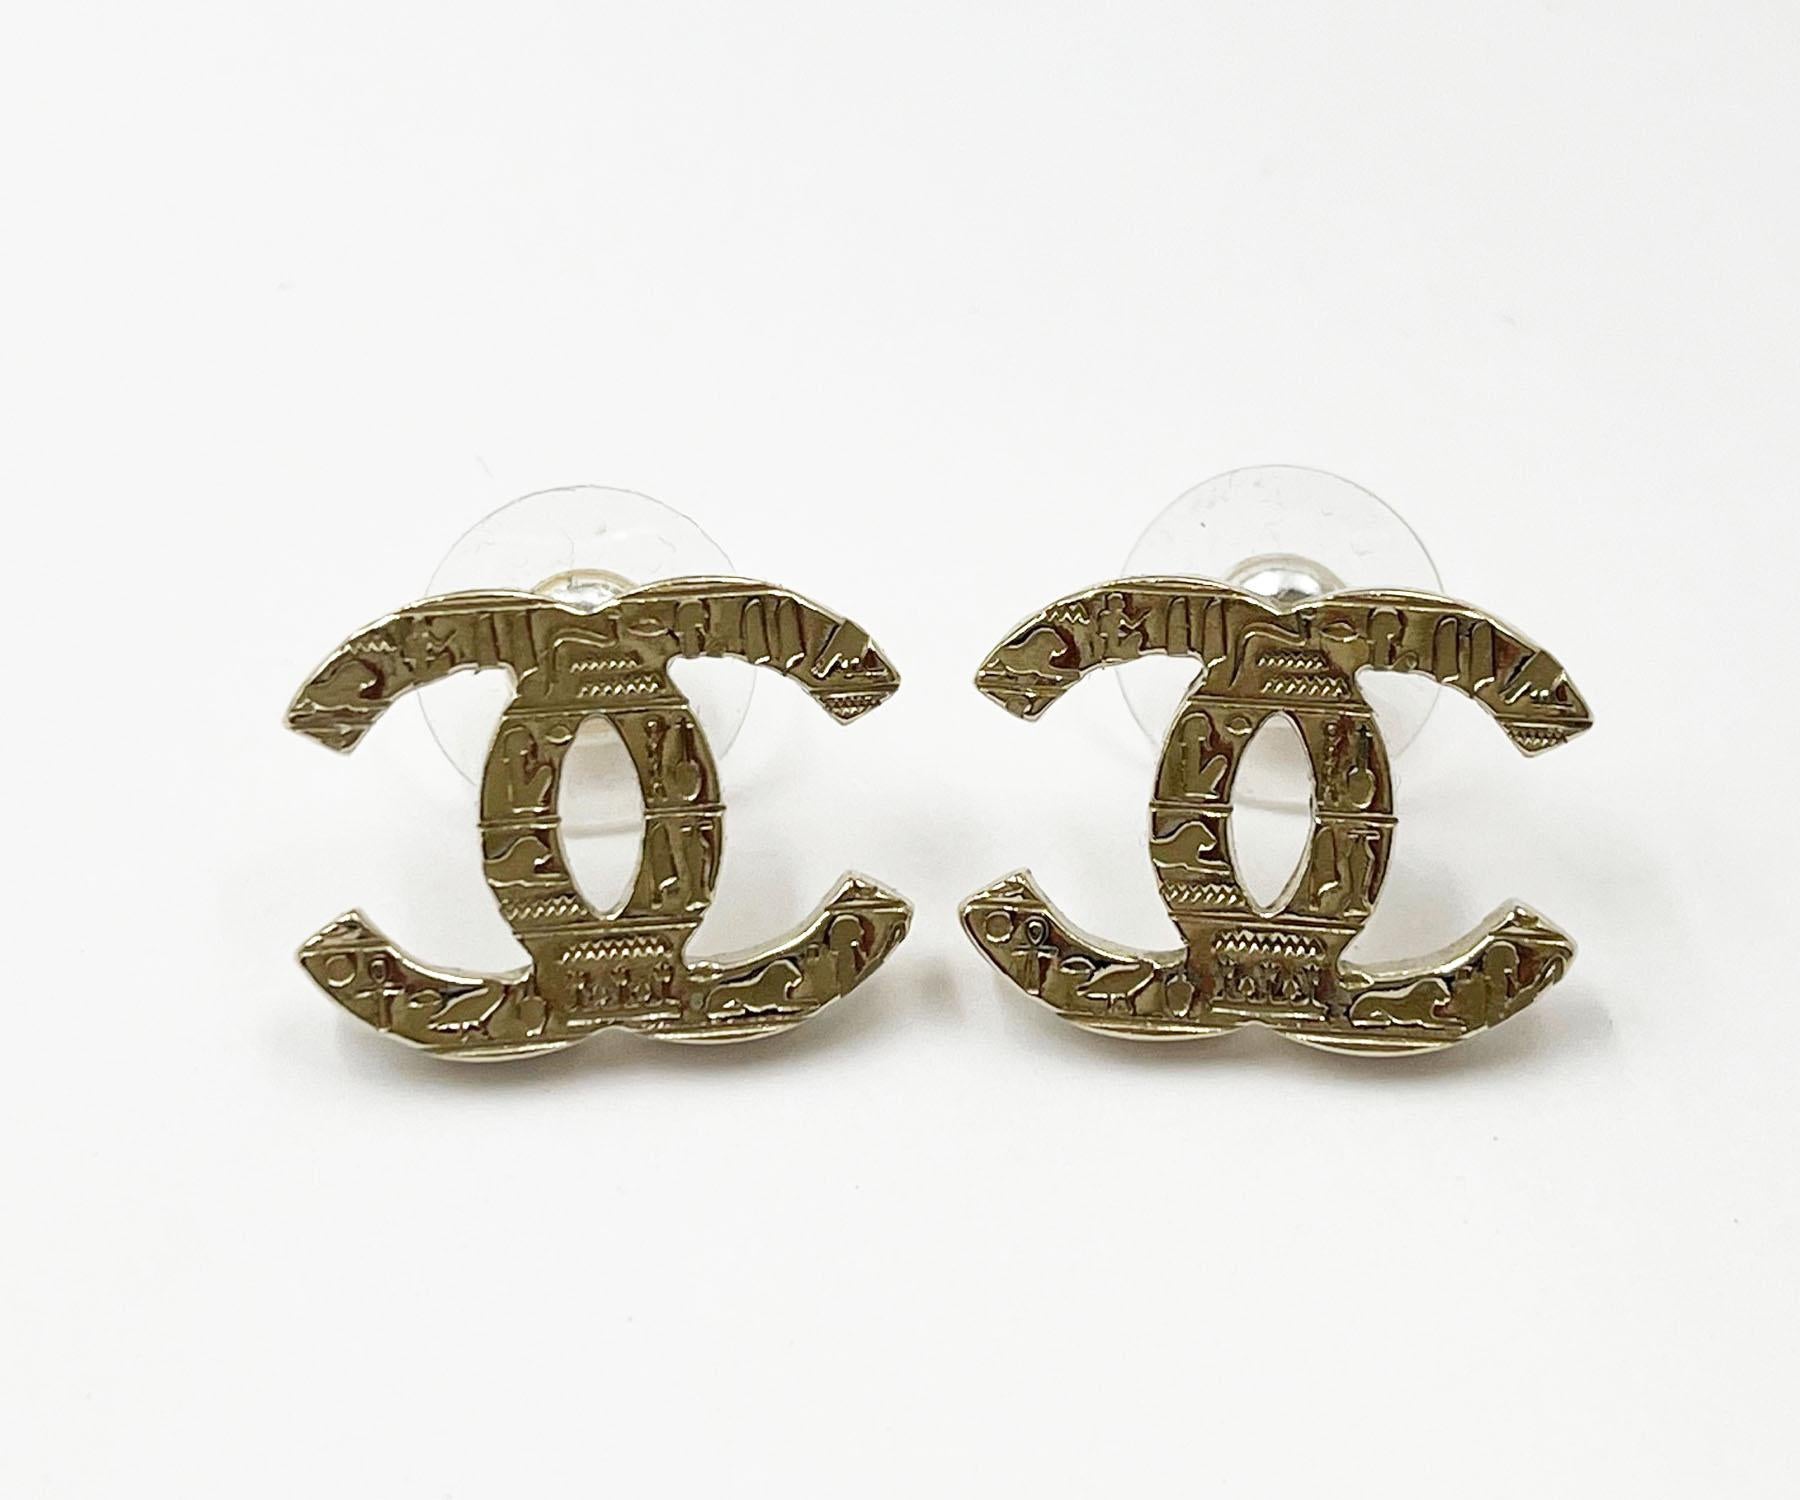 Chanel ClassicGold CC Hieroglyphs Stud Piercing Earrings

*Marked 19
*Made in France
*Comes with the original box, pouch and booklet

-It is approximately 0.75